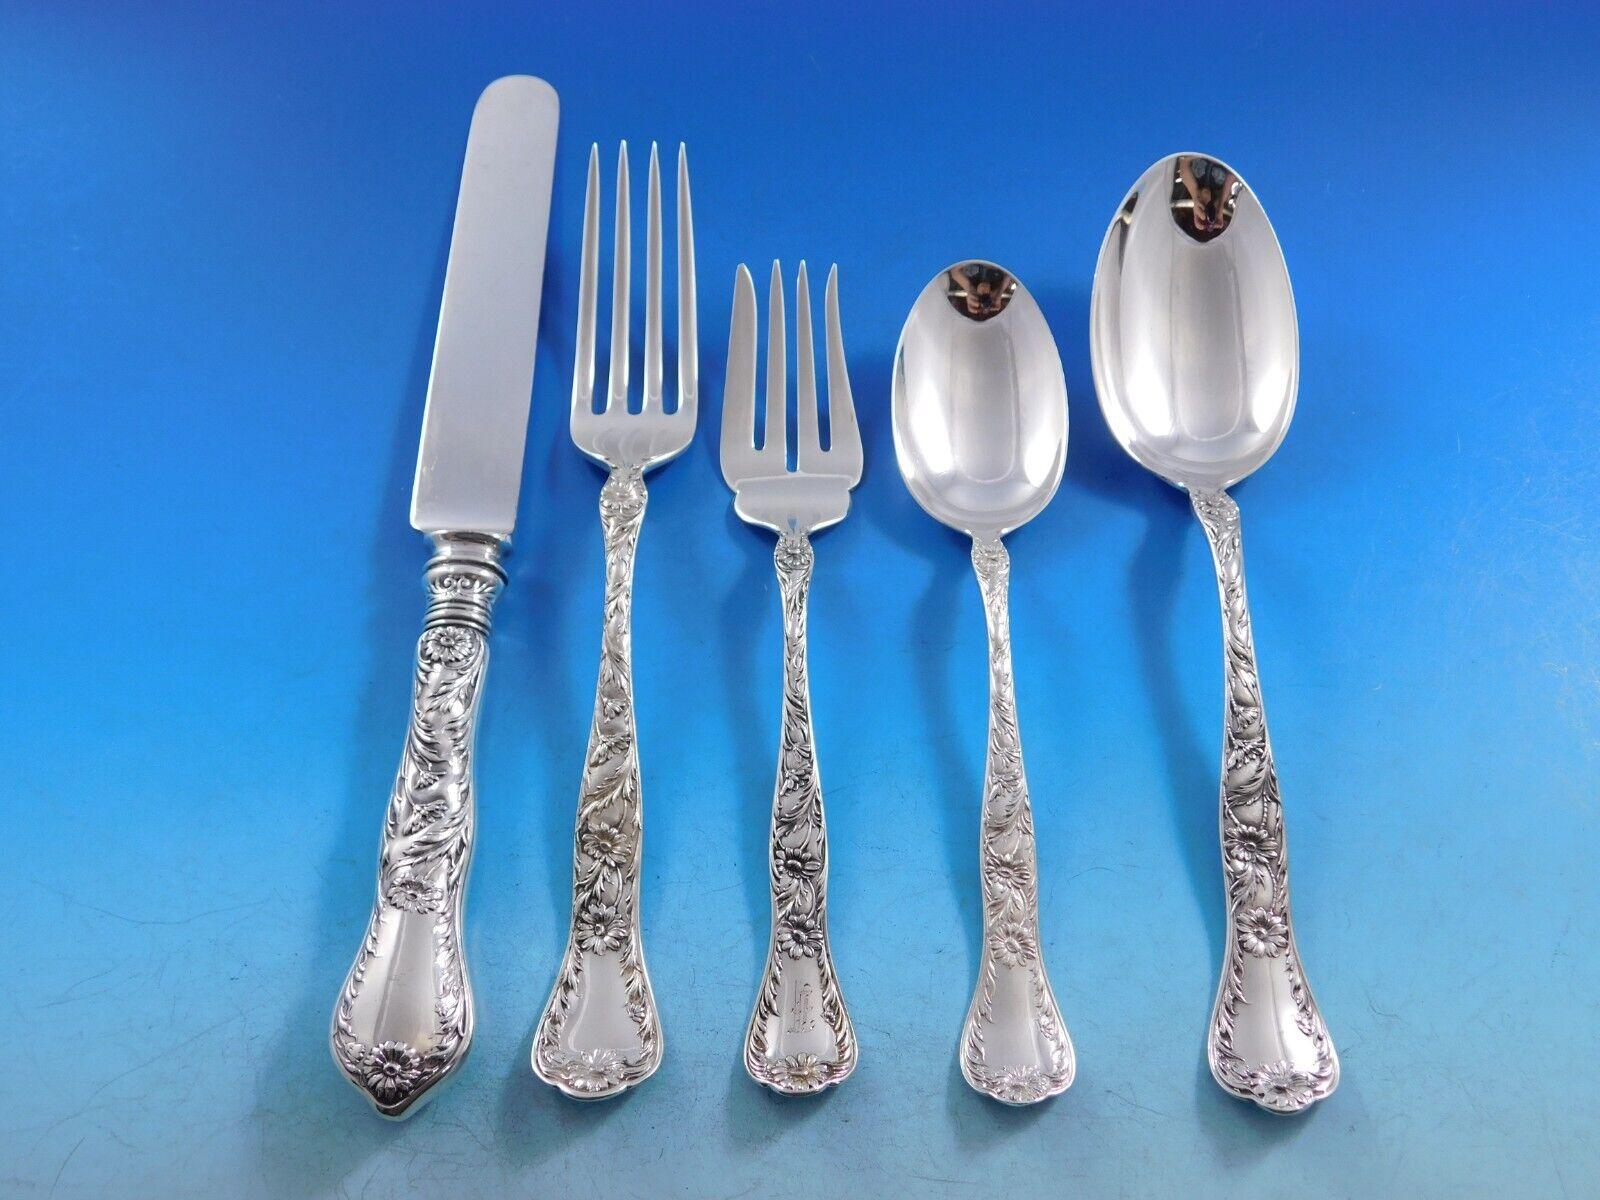 Beautiful Marguerite by Gorham Sterling Silver Flatware set with daisy flower motif - 53 pieces. This set includes:

10 Knives with Blunt blades, 8 1/2